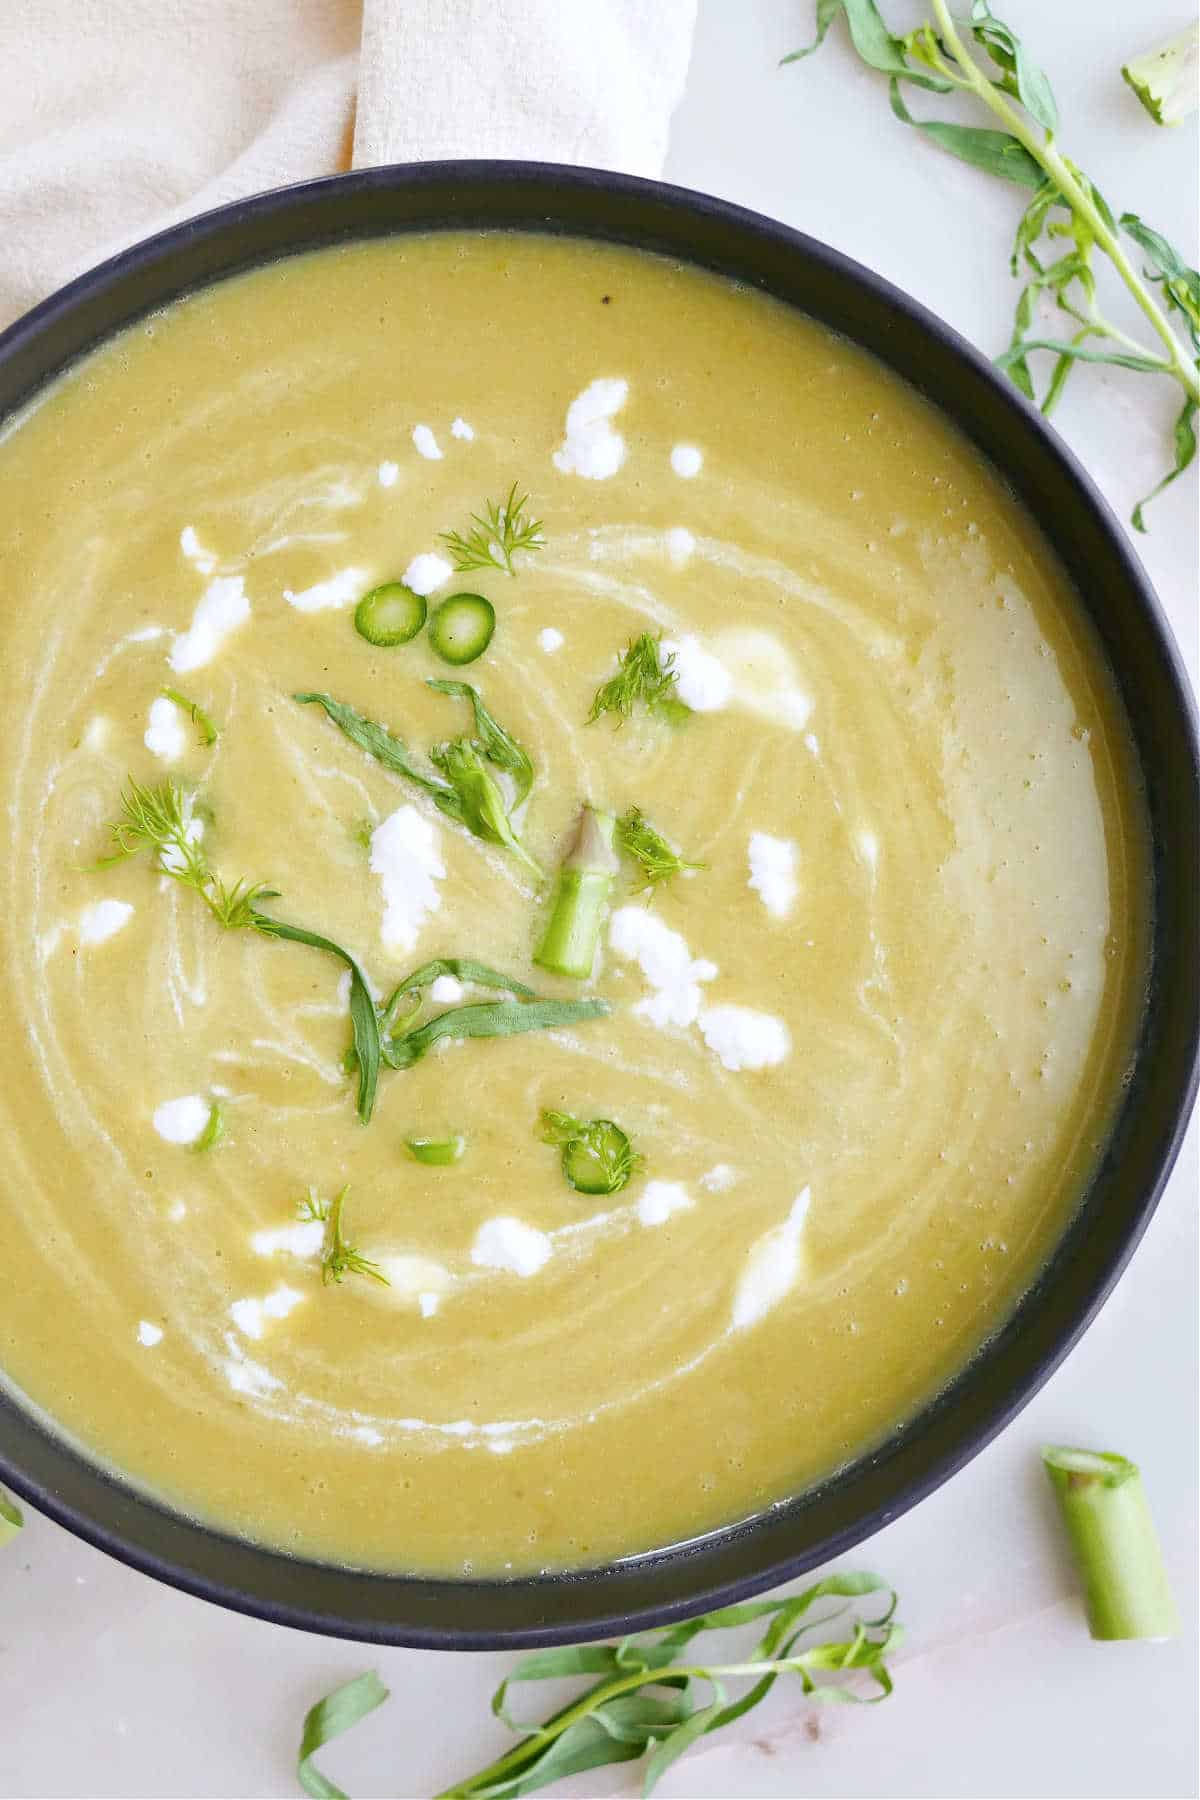 Cold asparagus soup garnished with herbs and asparagus.